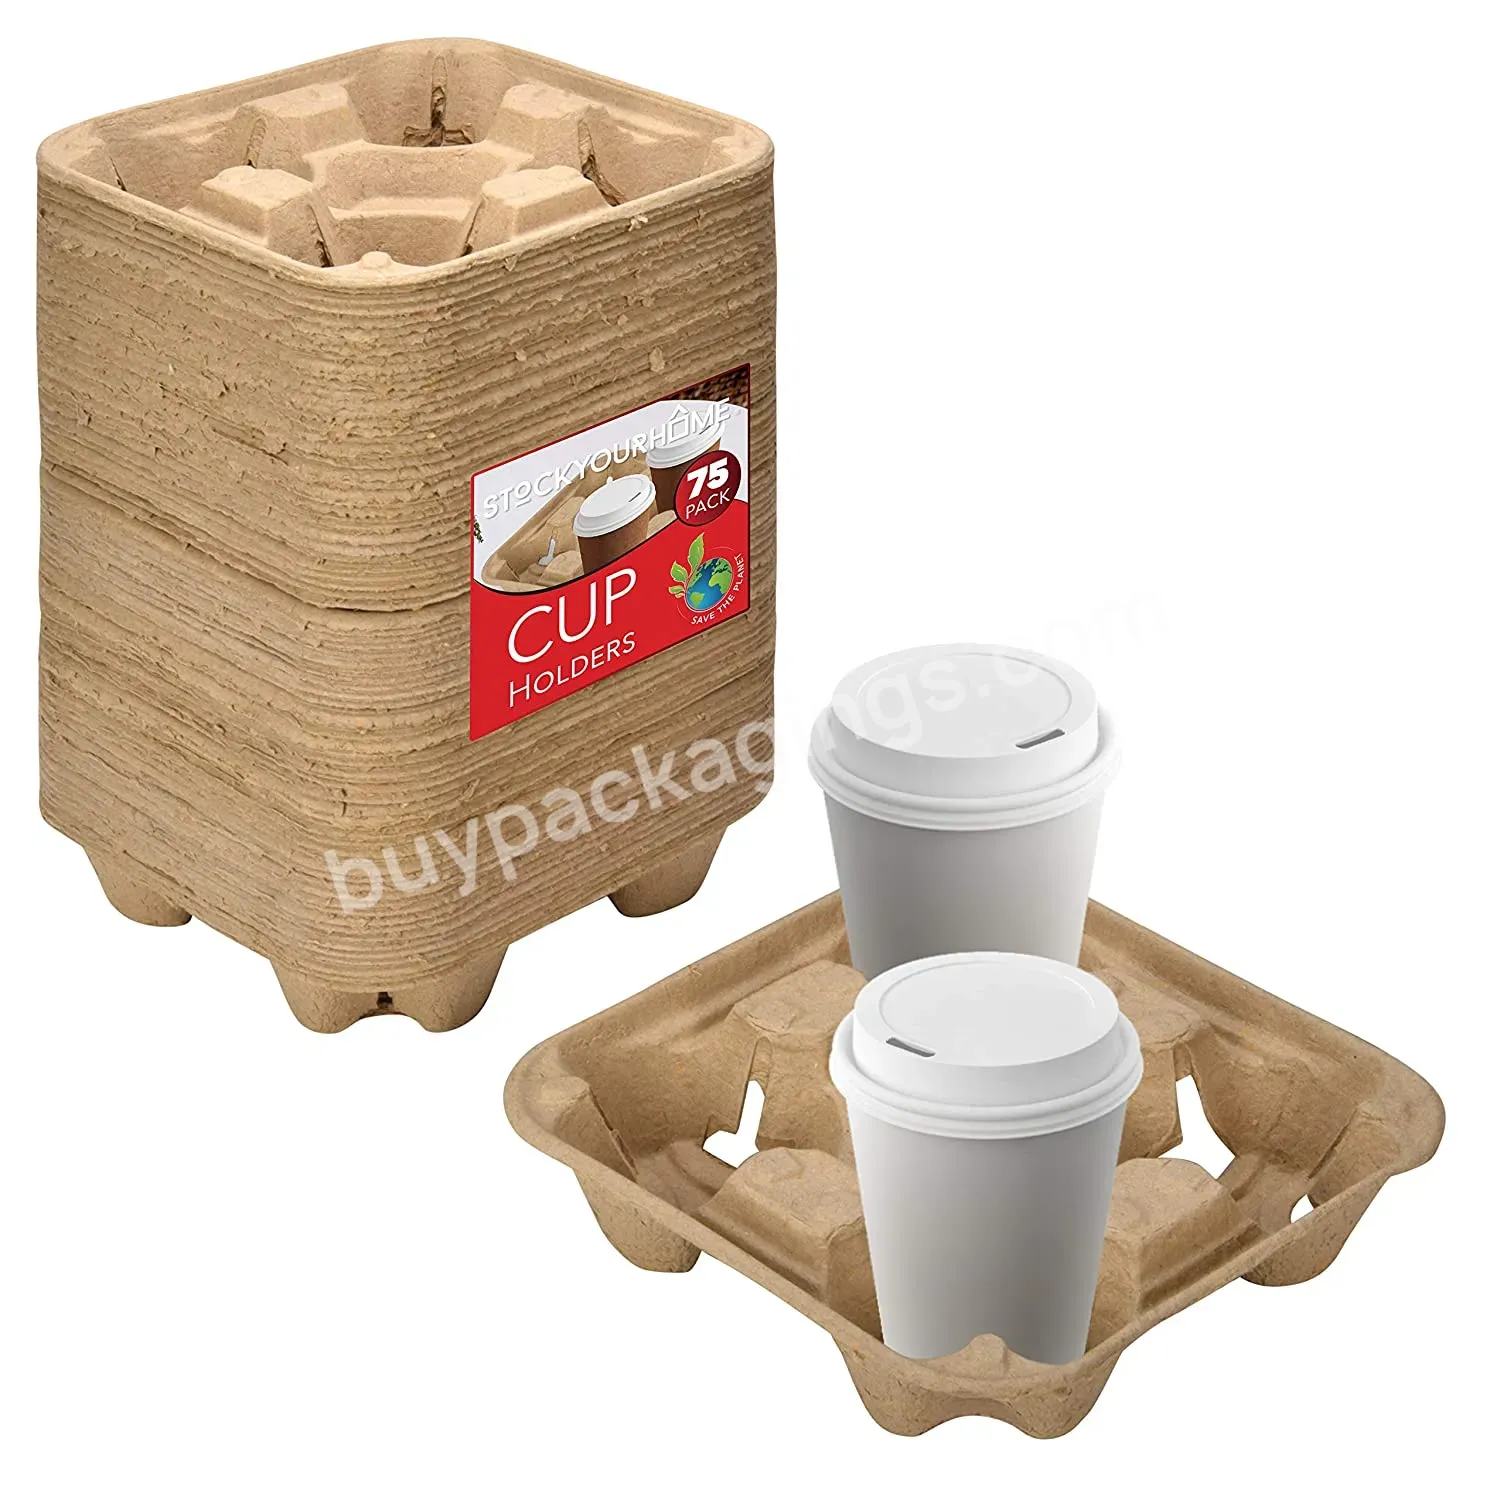 Biodegradable Molded Pulp Cup Carrier Recycled Materials Compost Paper Cup Holder Tray 2/4 Cups - Buy Disposable Paper Cup,Coffee Paper Cups,Disposable Cup Holder.